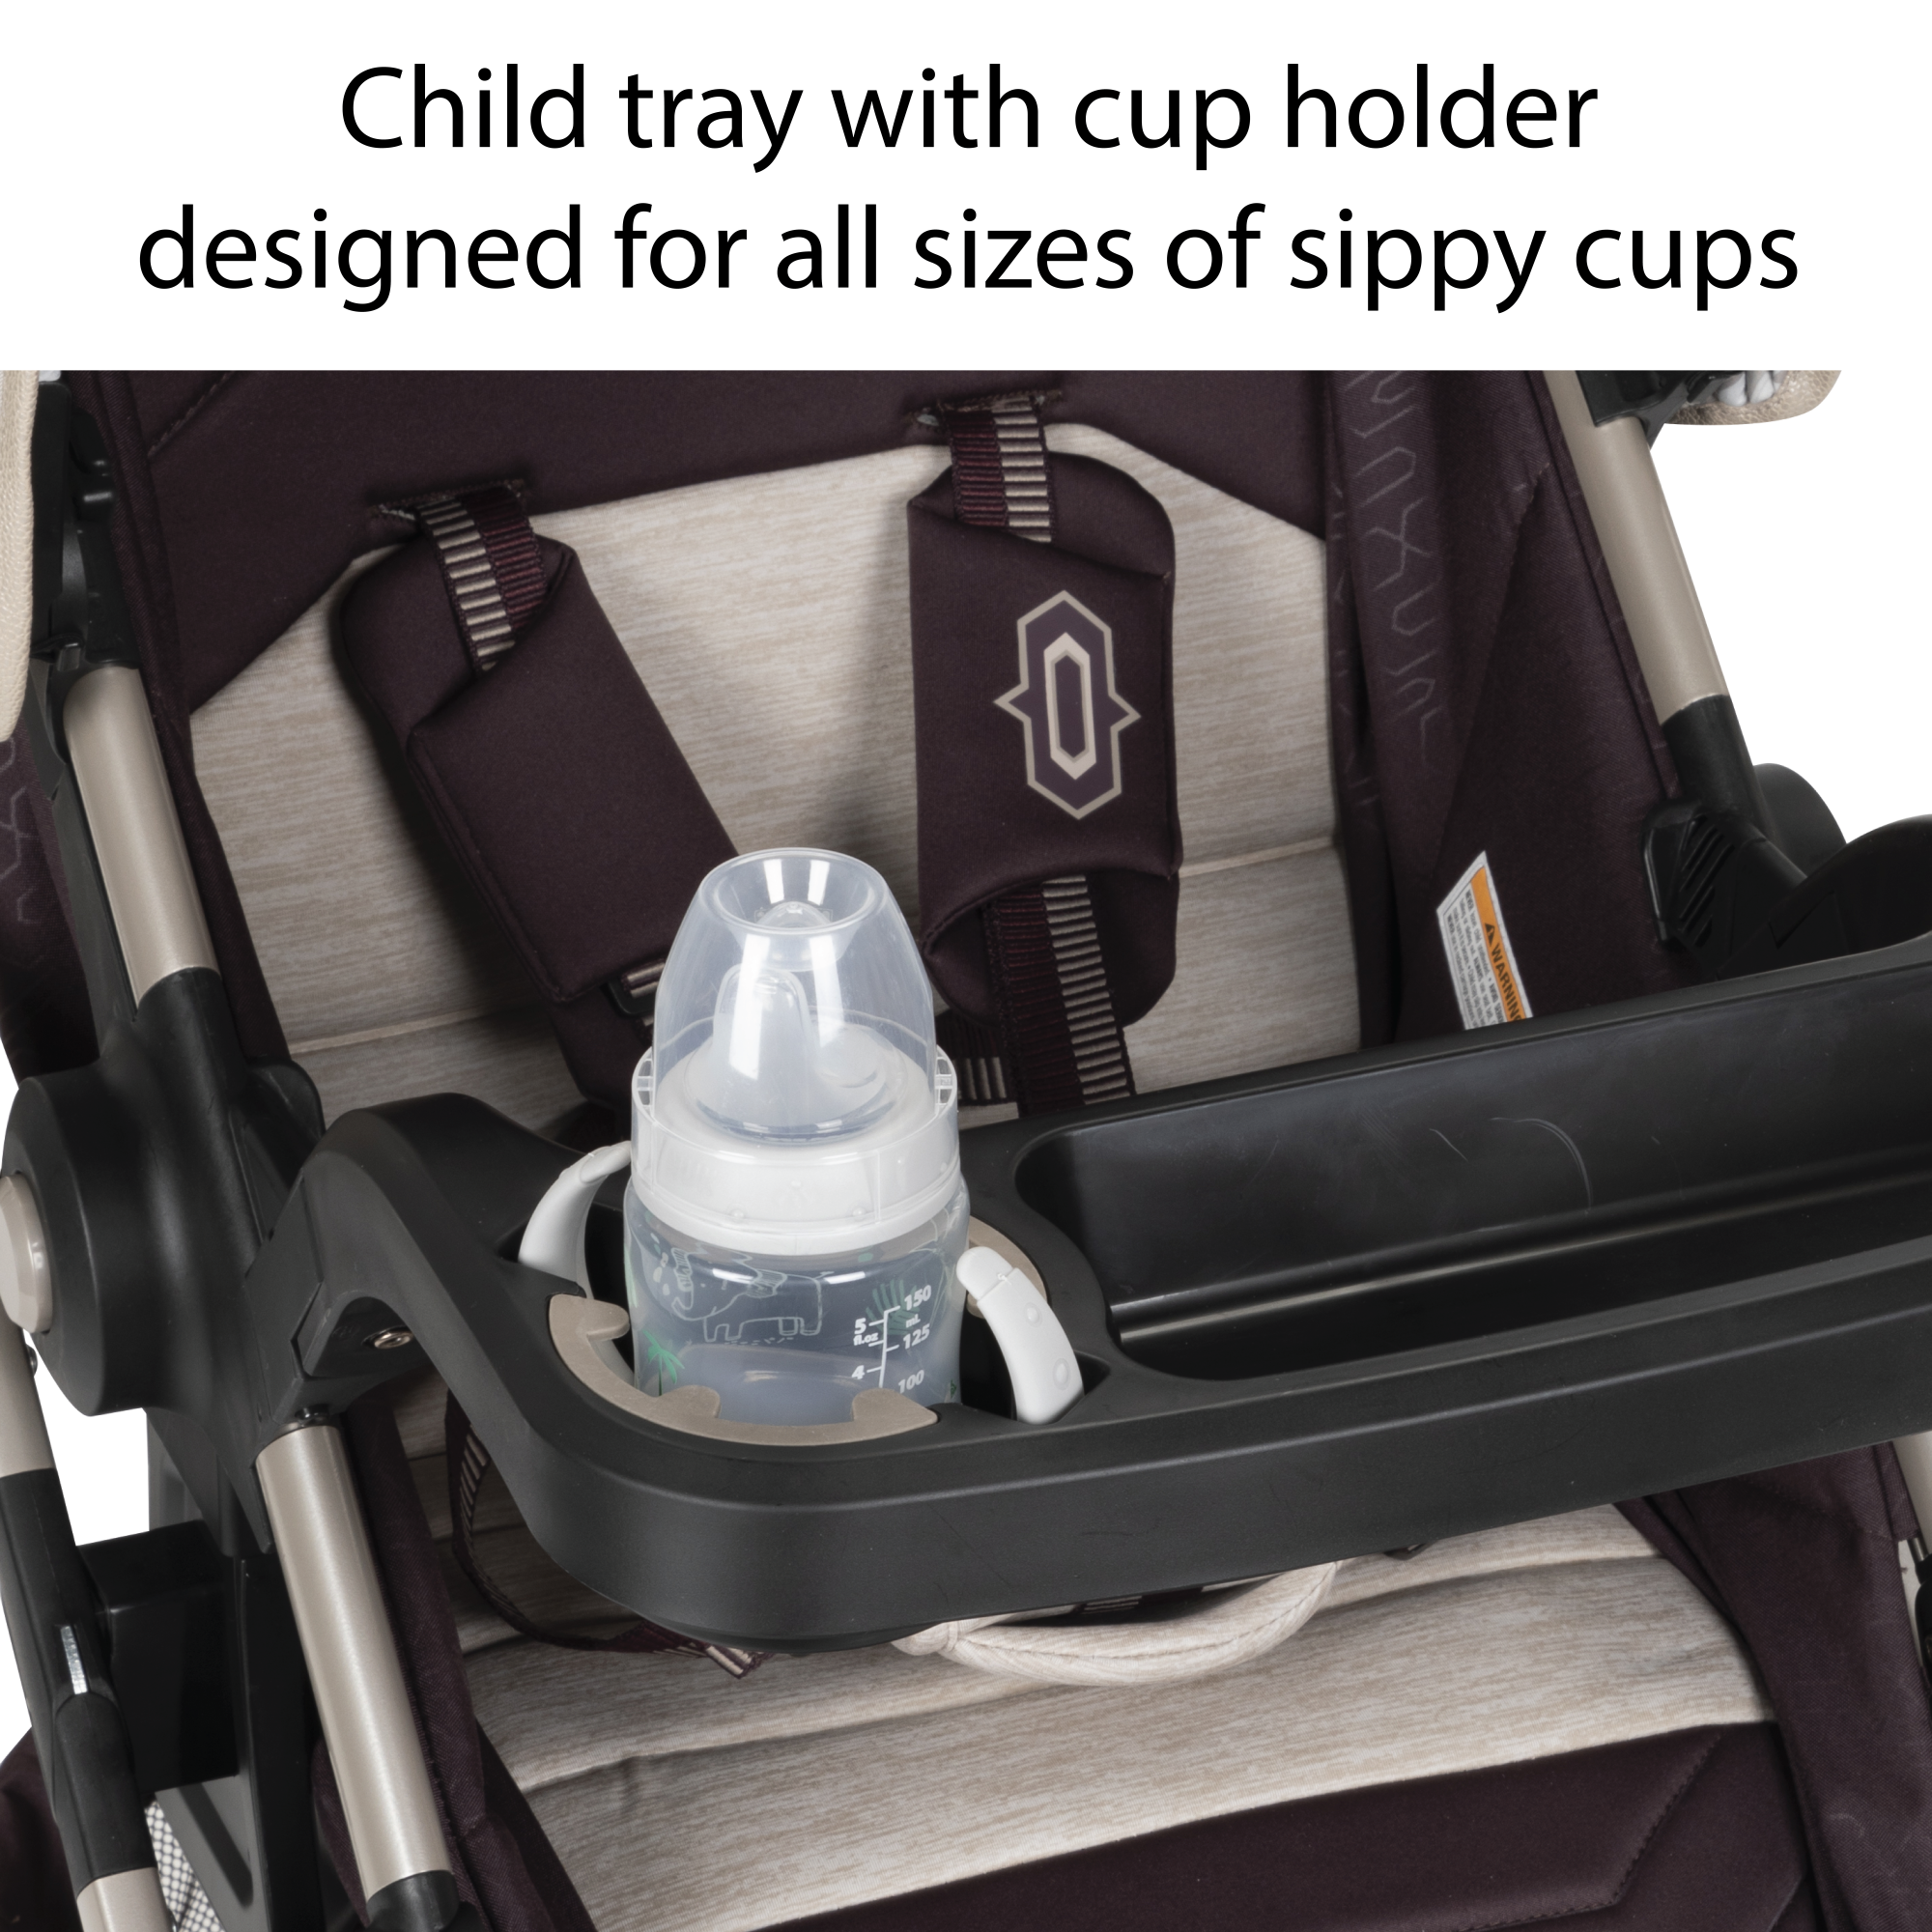 Deluxe Grow and Go™ Flex 8-in-1 Travel System - parent tray with 2 cup holders